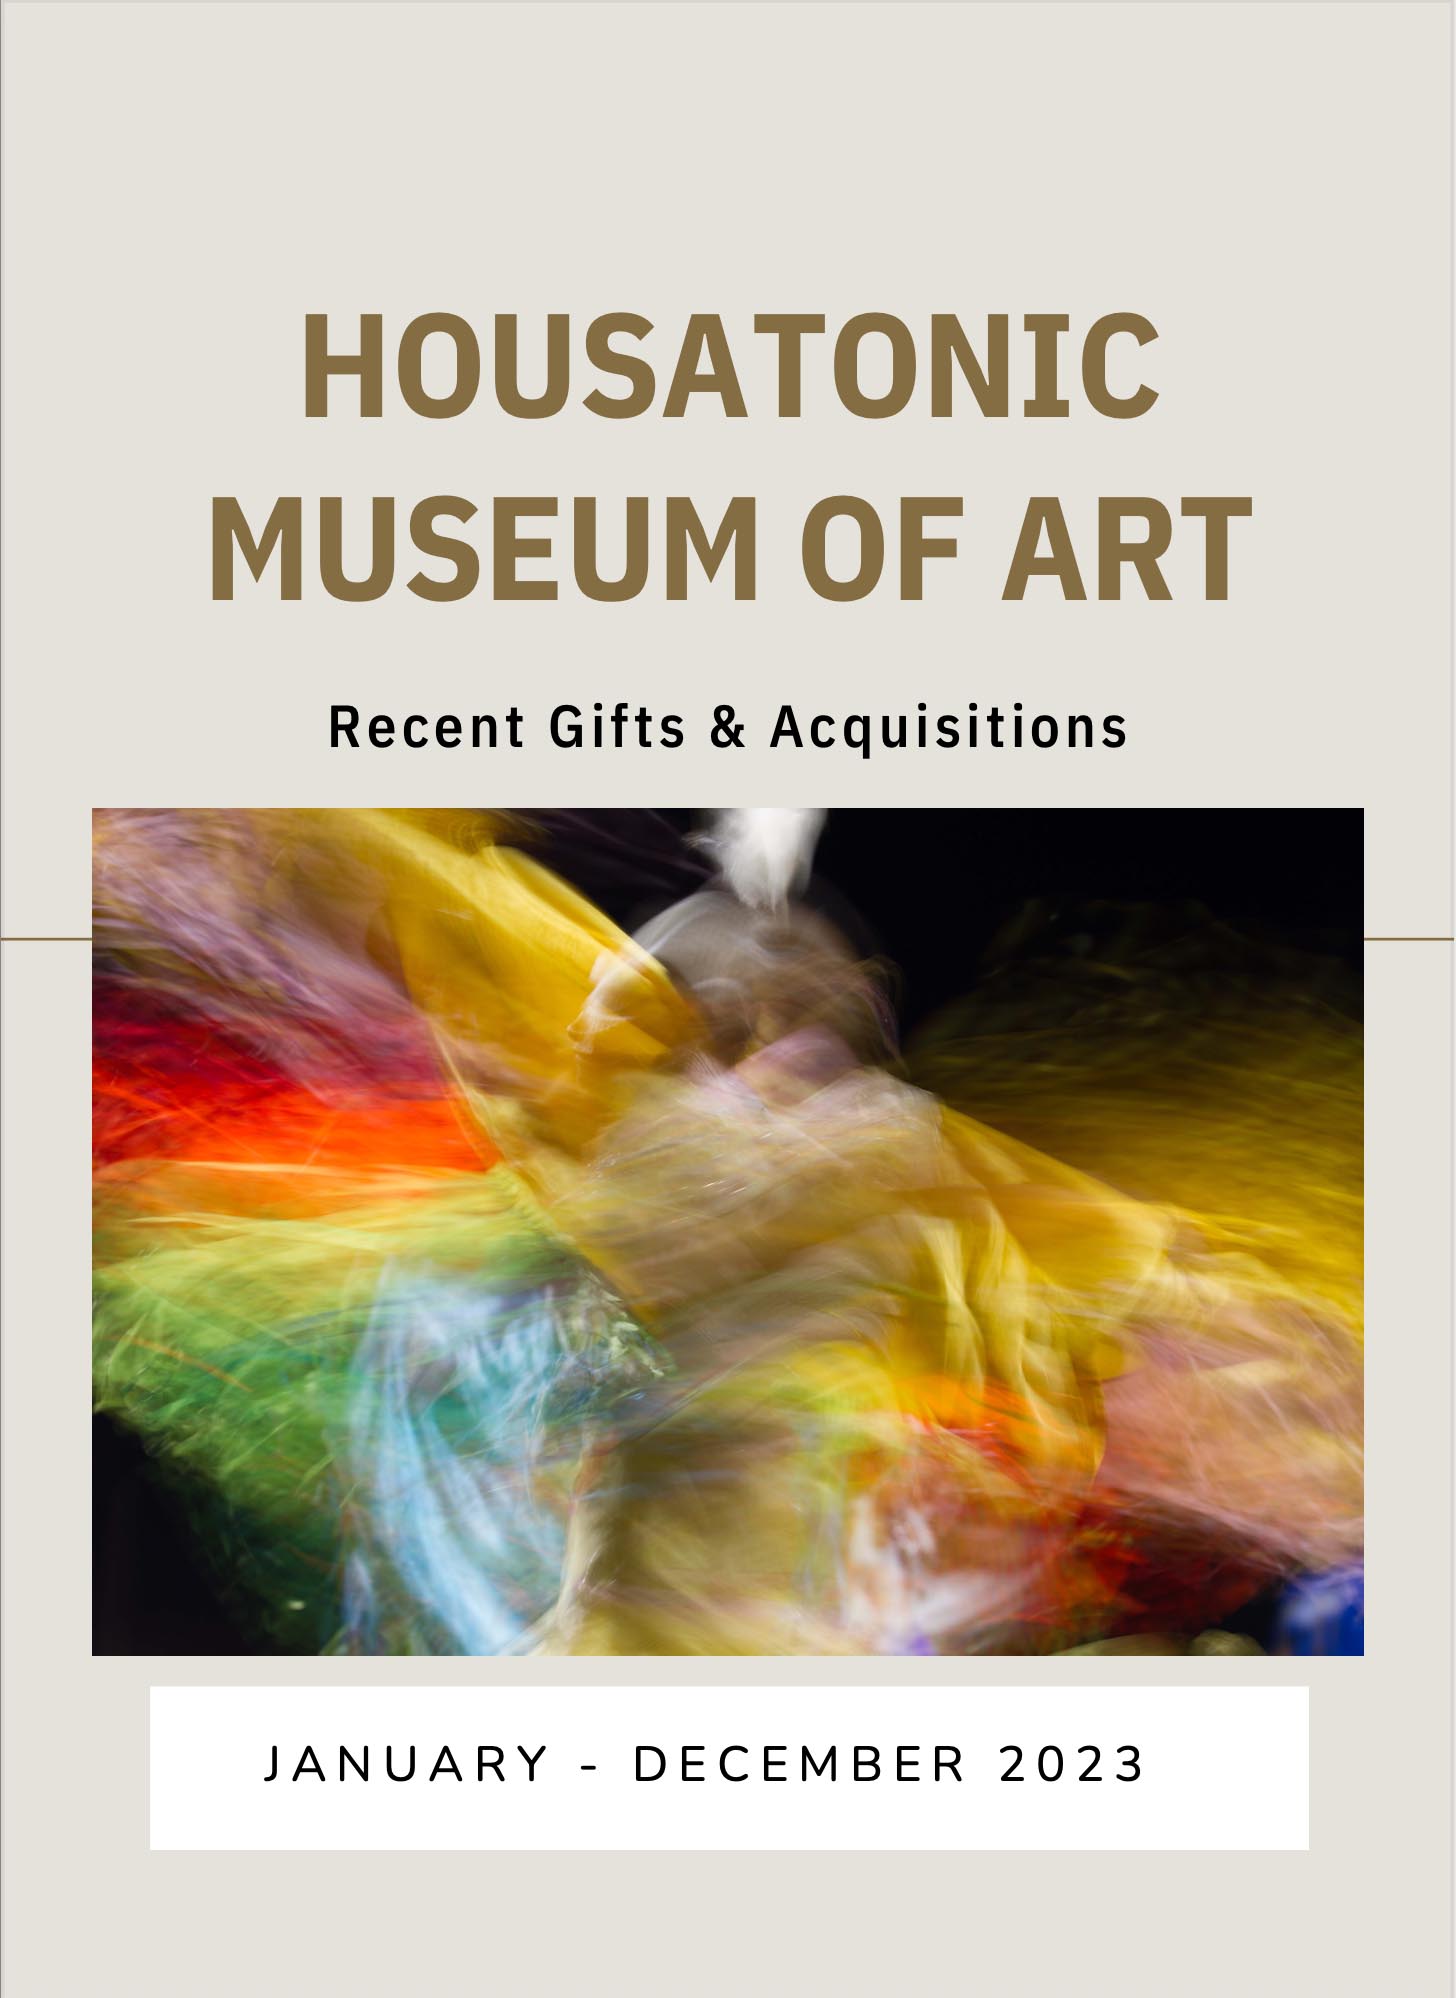 Download your copy of the Housatonic Museum of Art's booklet, Recent Gifts and Acquisitions 2023